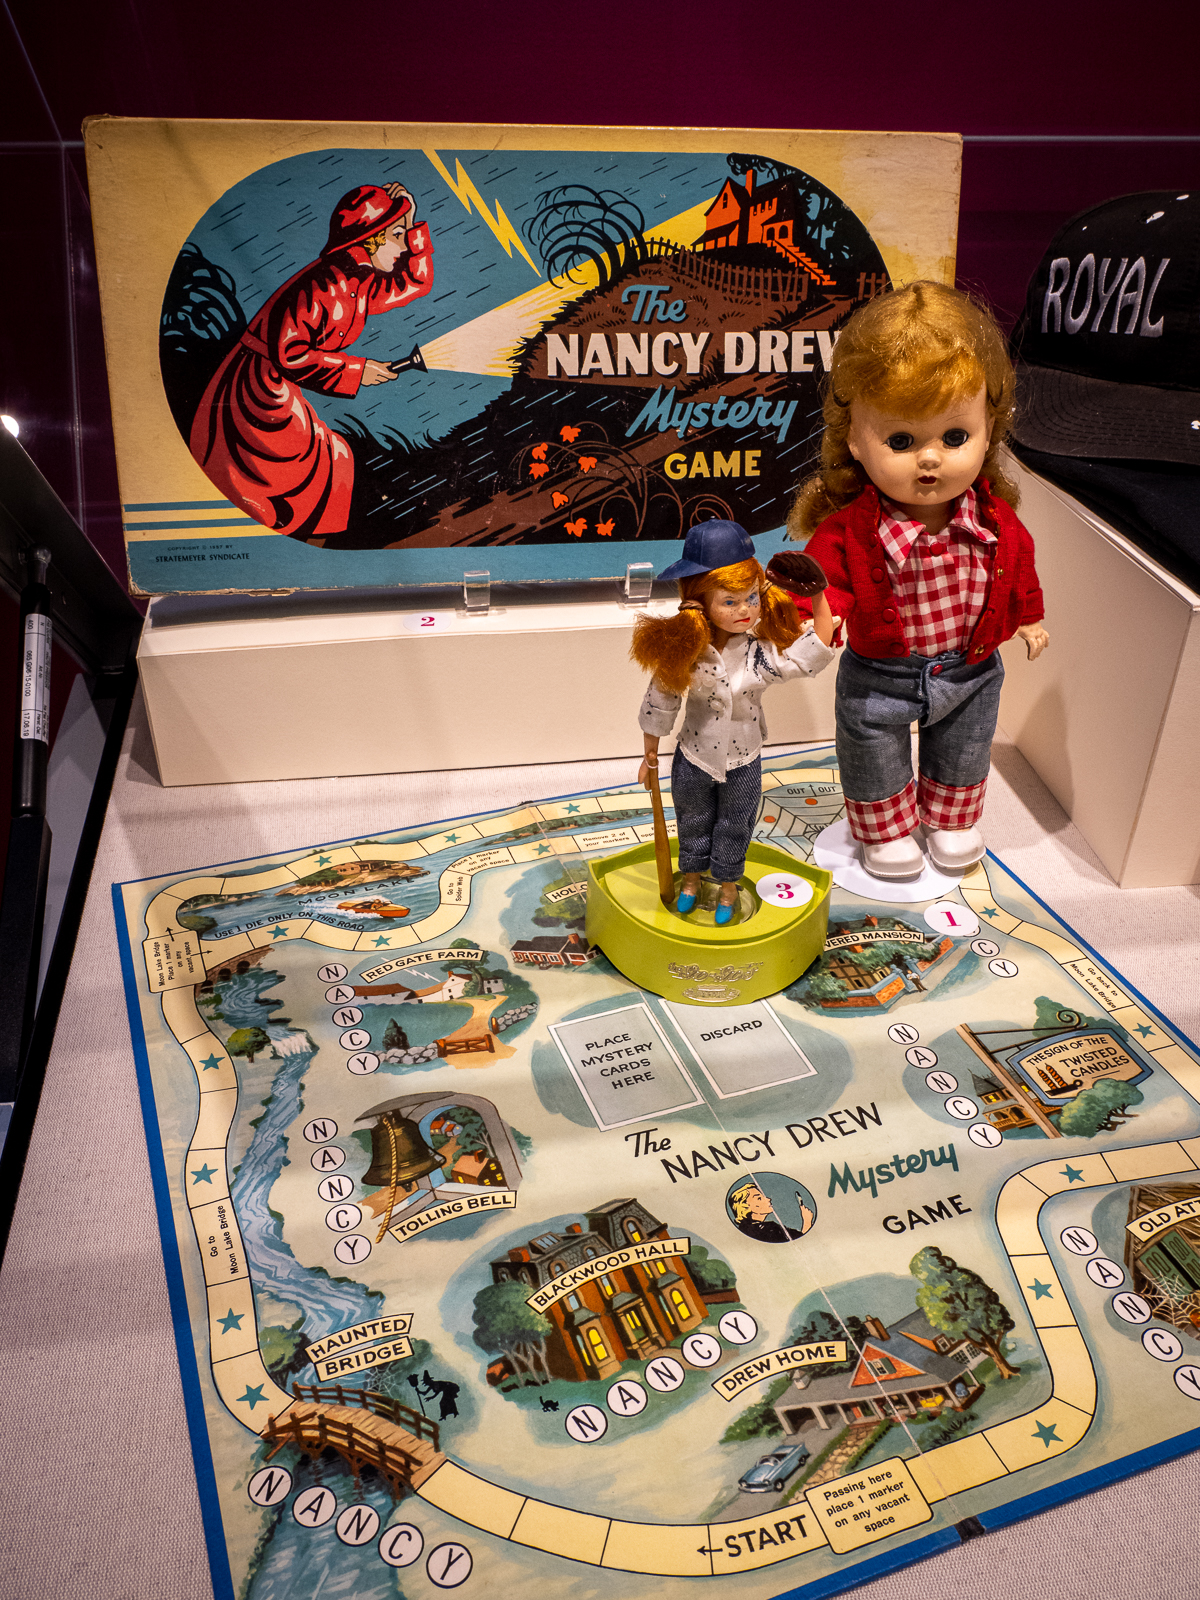 Nancy Drew board Mystery game, 1957 & Nancy Ann doll, circa 1955. On loan from Boston Children’s Museum. Tomboy! Go Go Doll by Topper, 1965. On loan from a private collection.